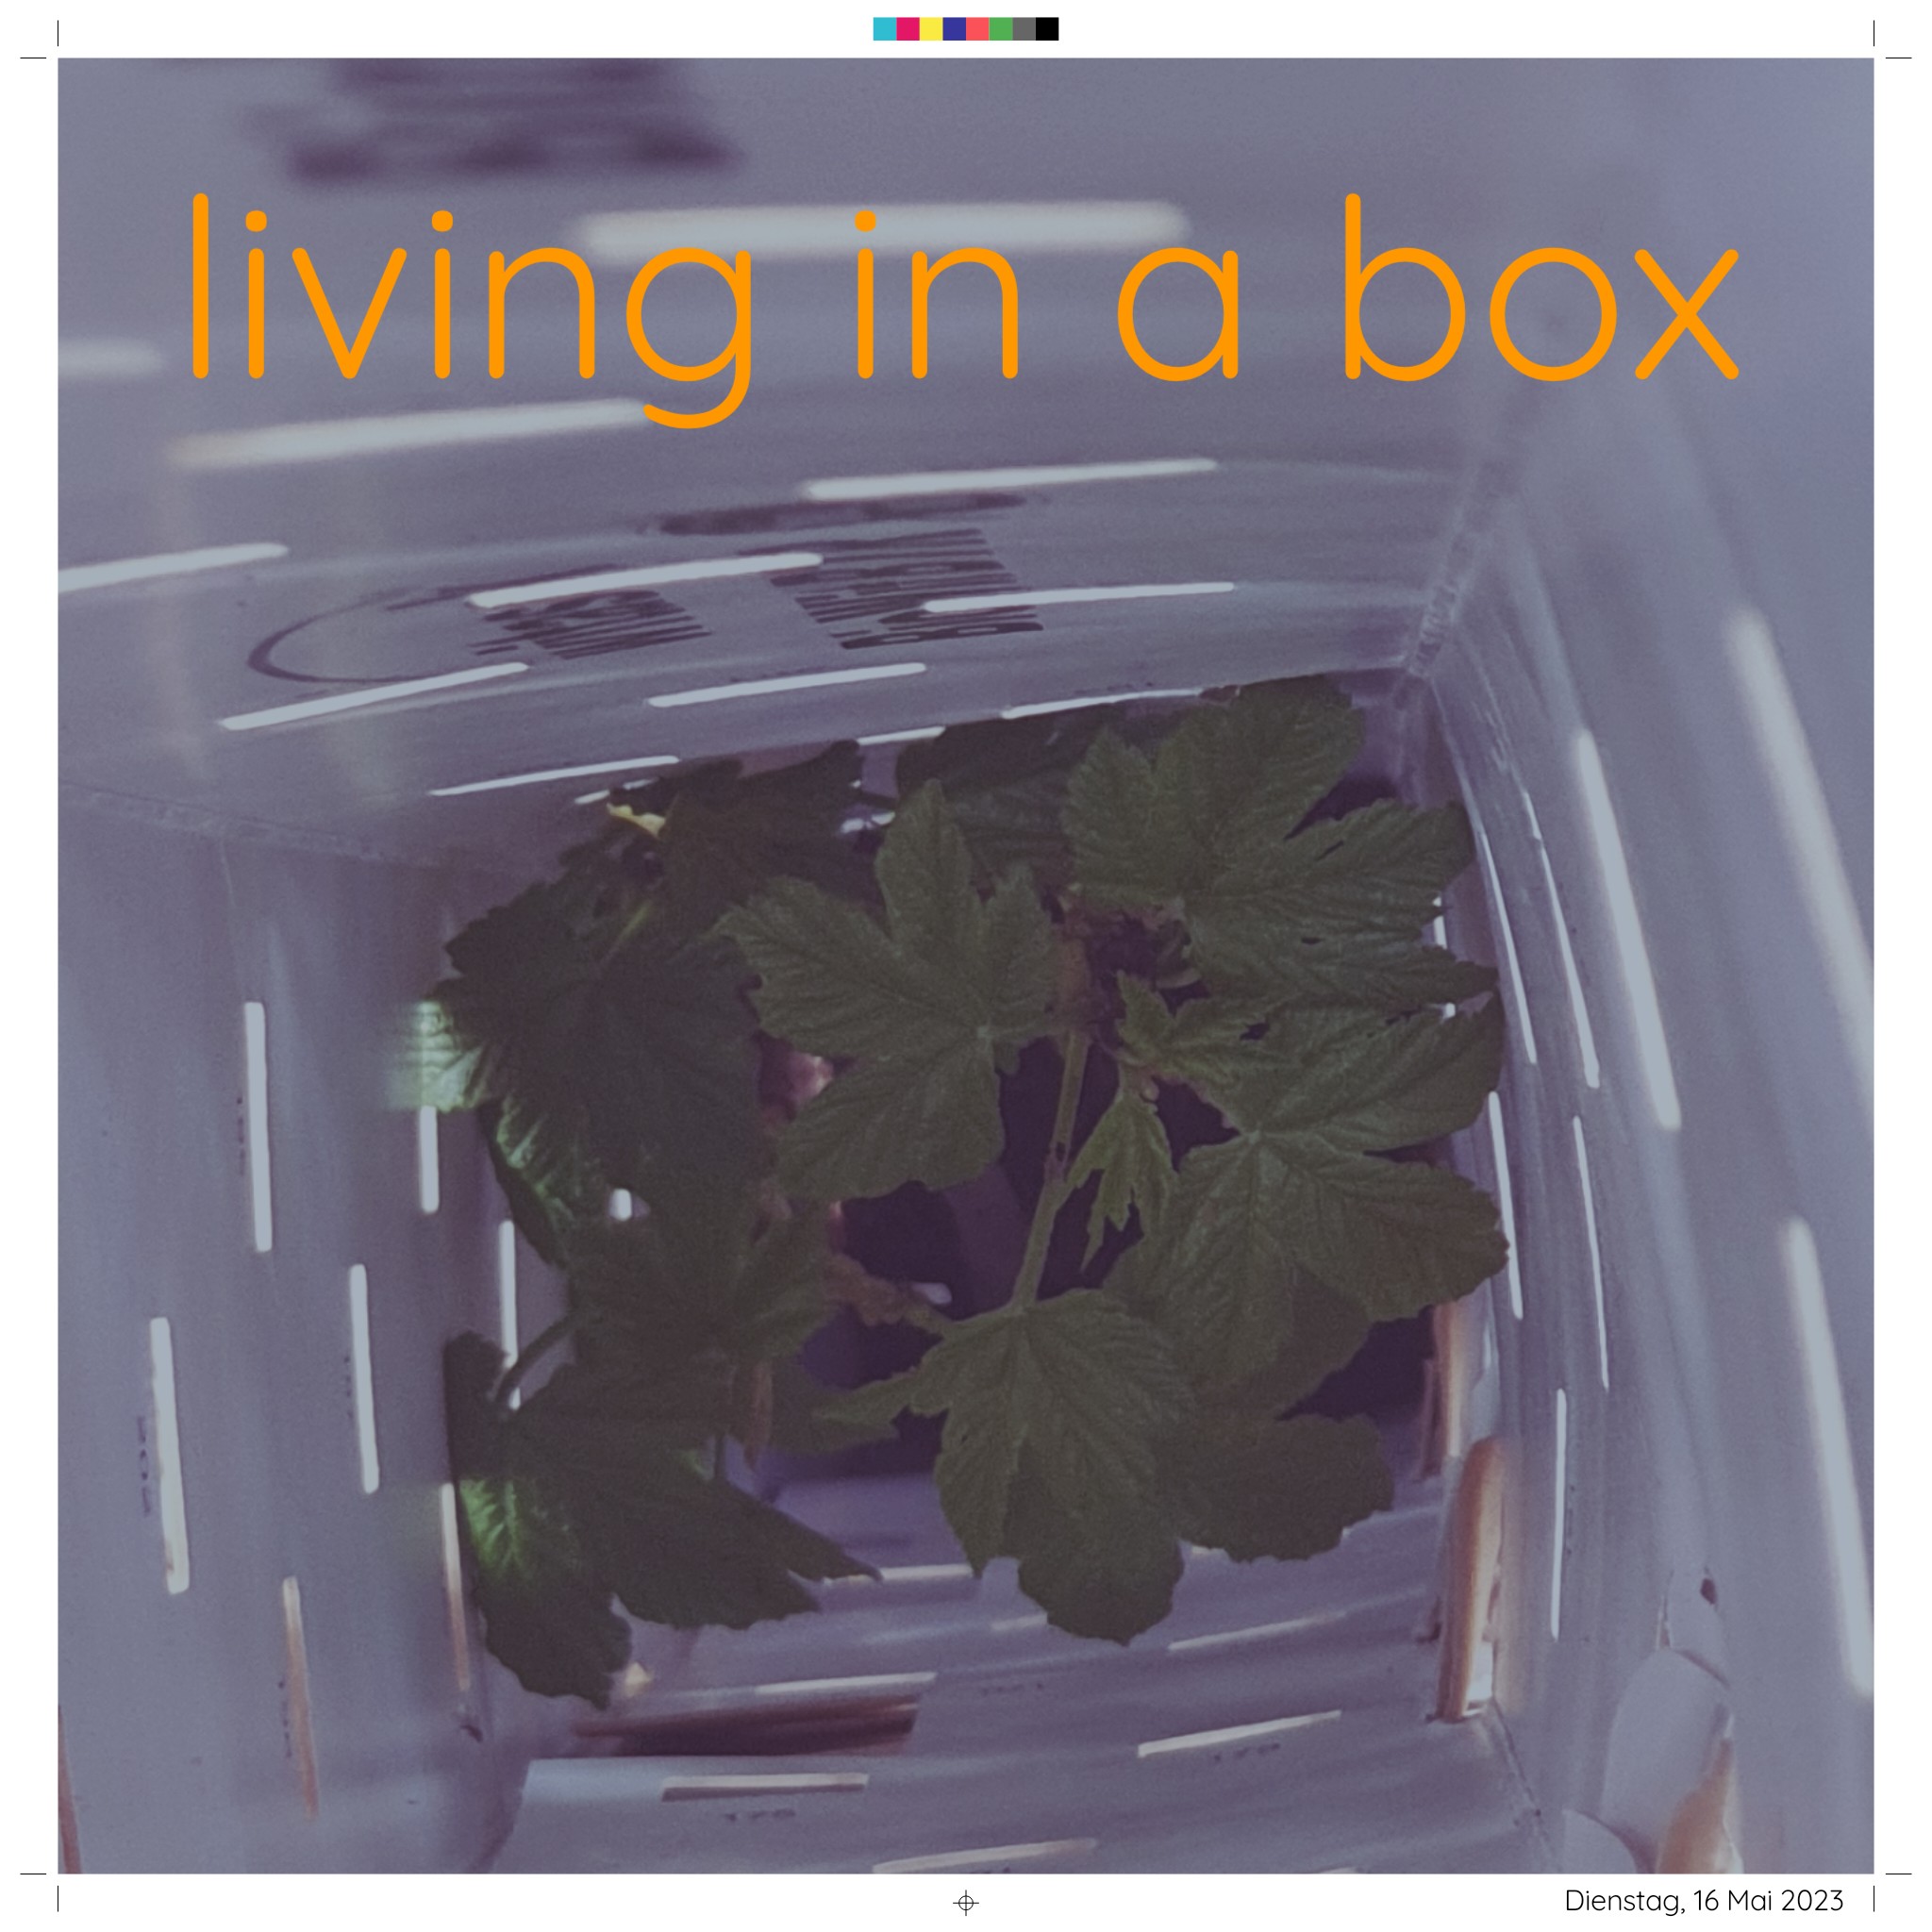 Living in a box